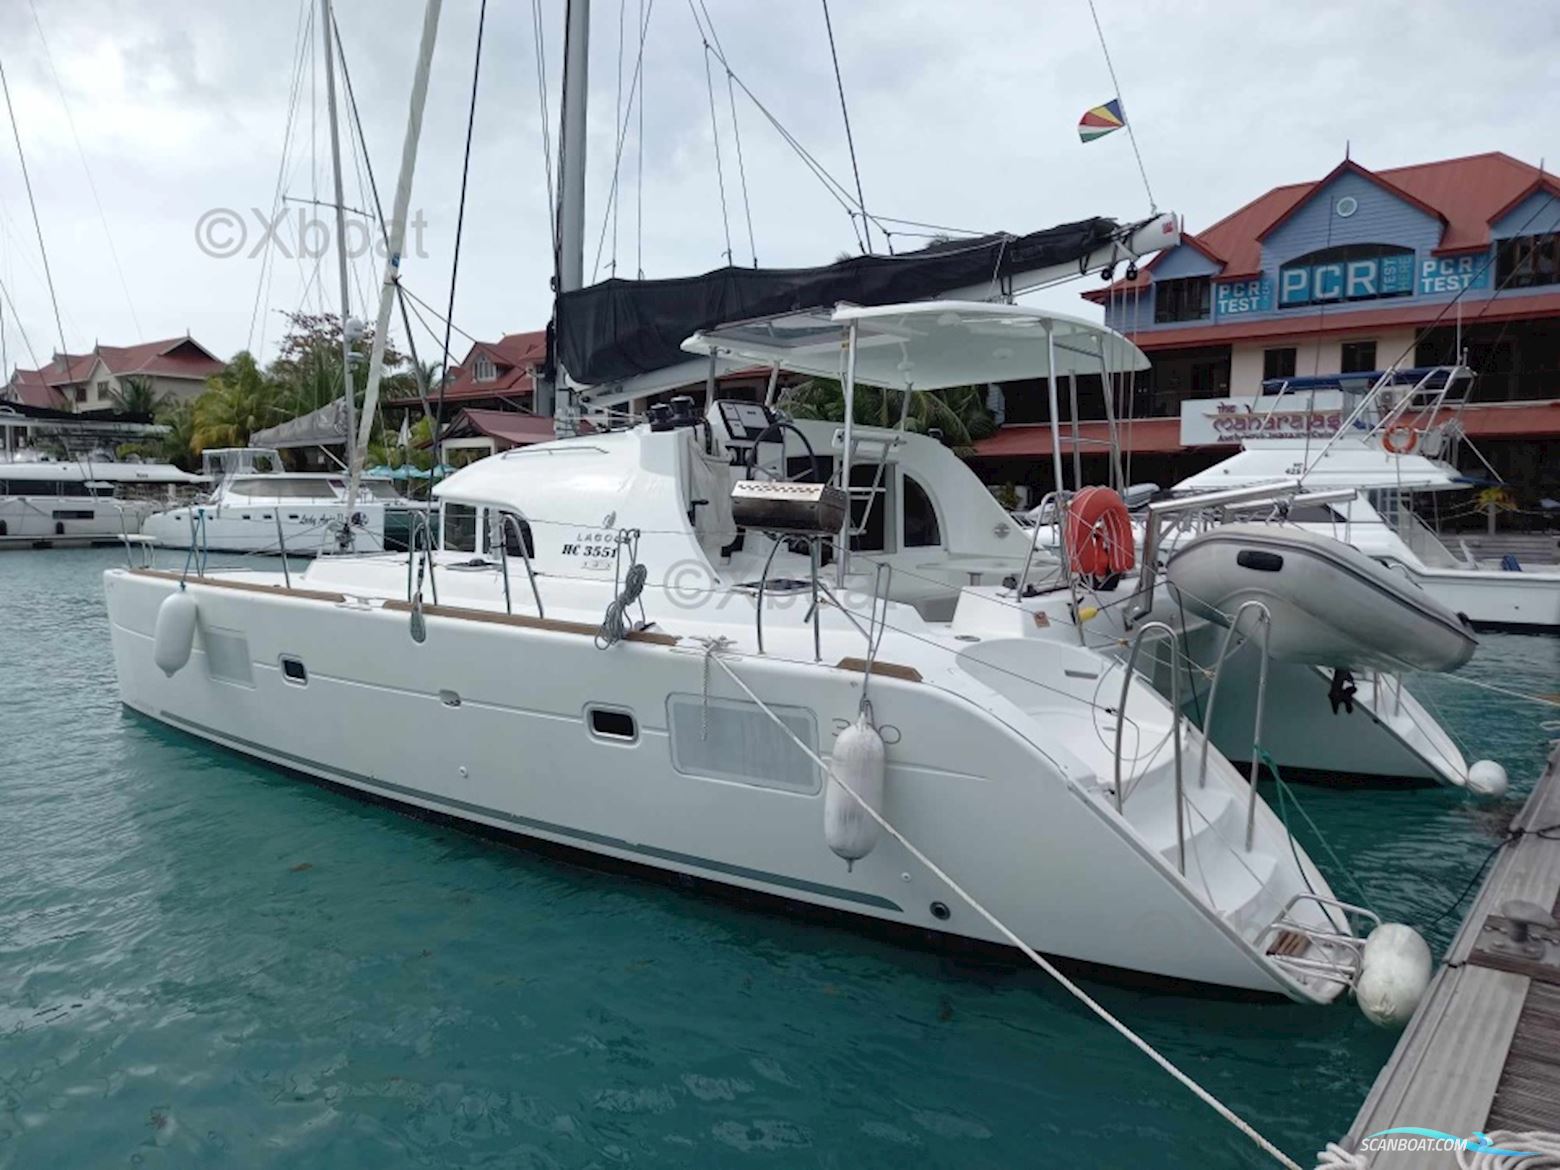 Lagoon 380 S2 Sailing boat 2016, with Yanmar diesel engine, No country info